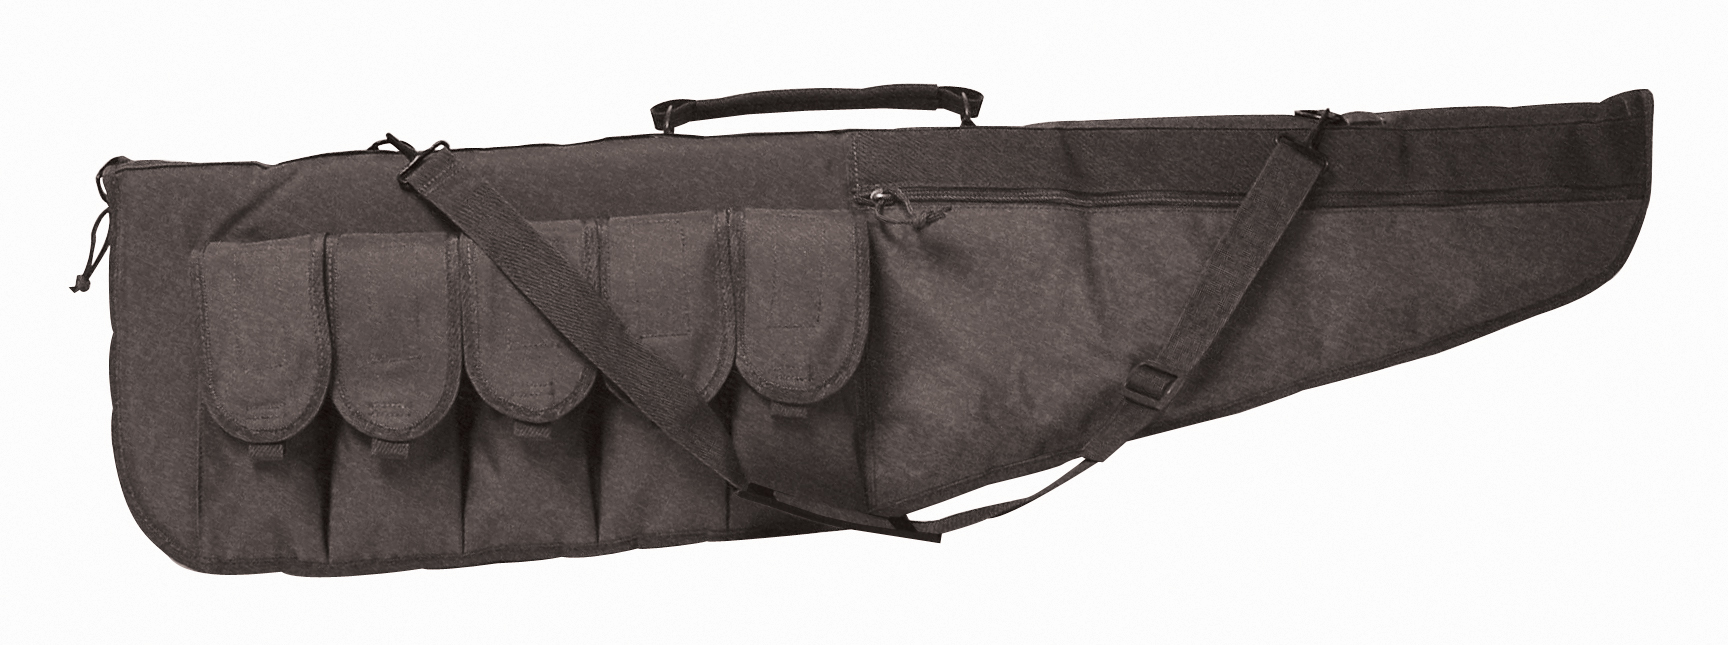 "Protector" Rifle Case  